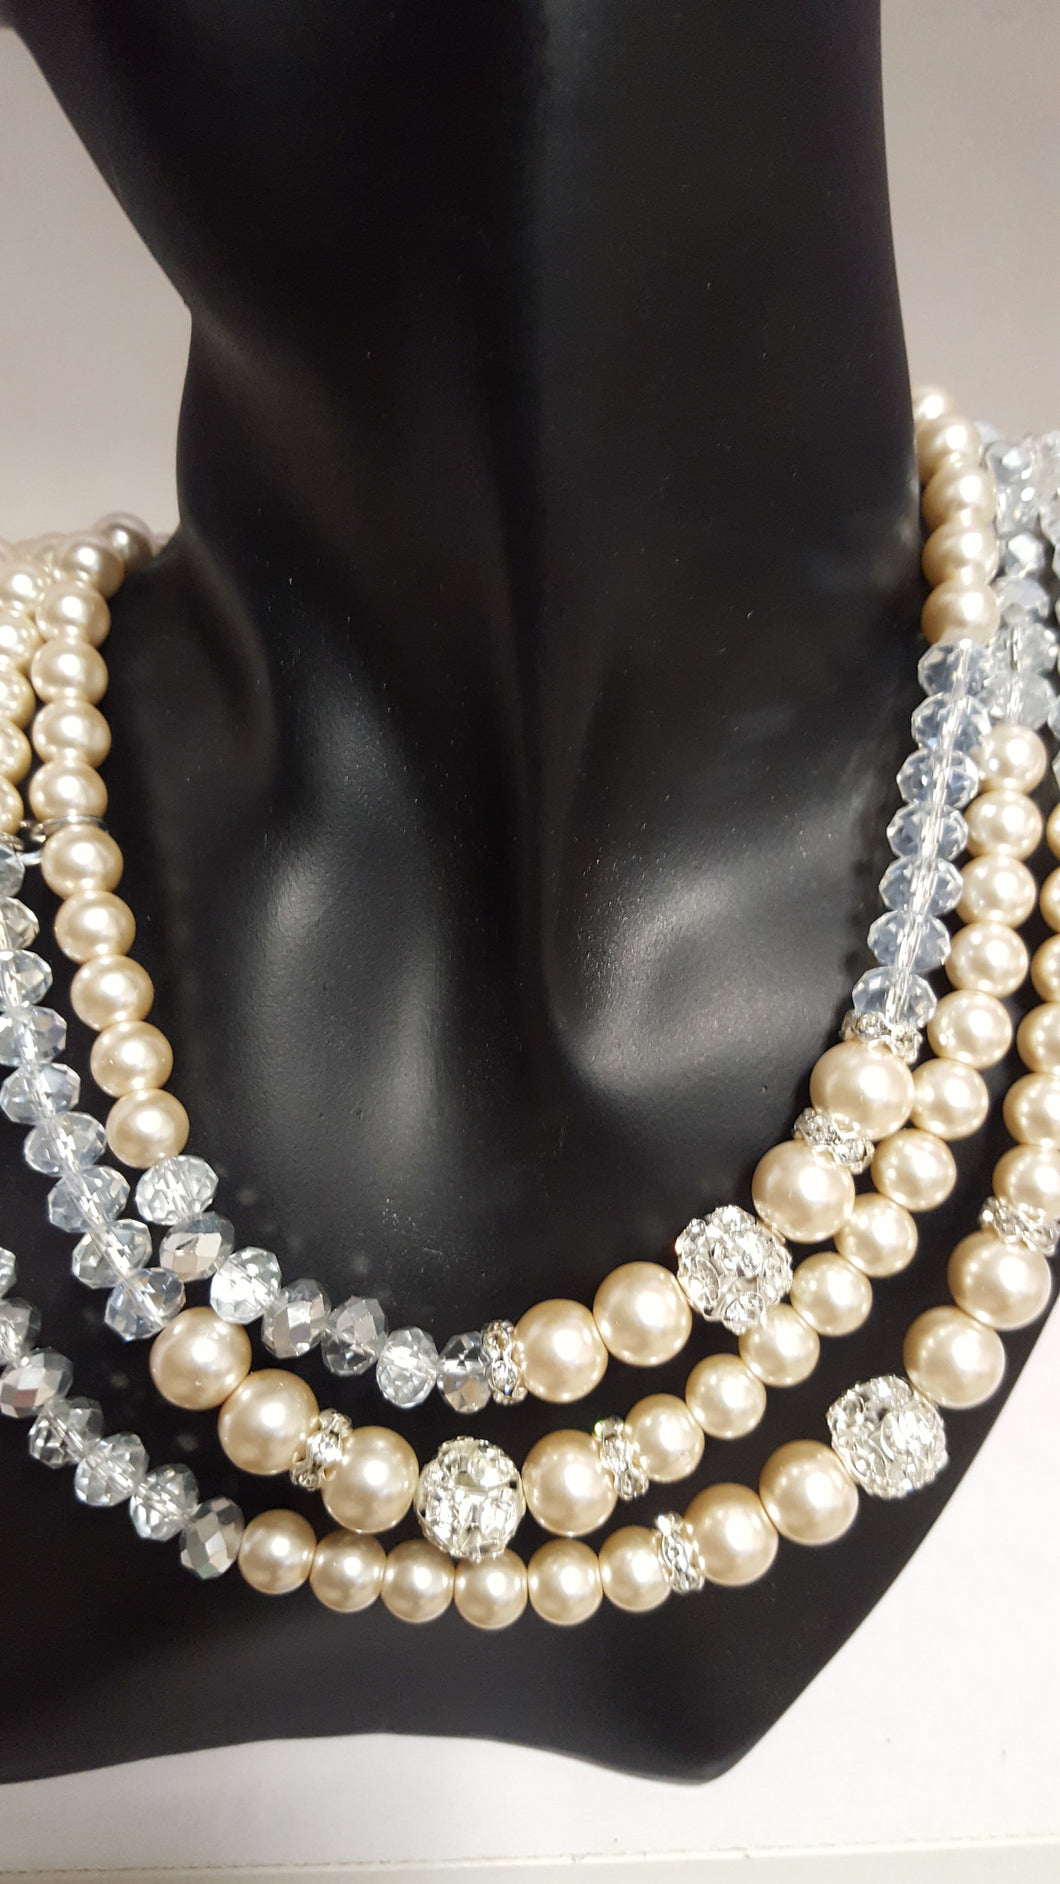 3 Strand Pearl & Crystal Necklace - Whitehot Jewellery - 1